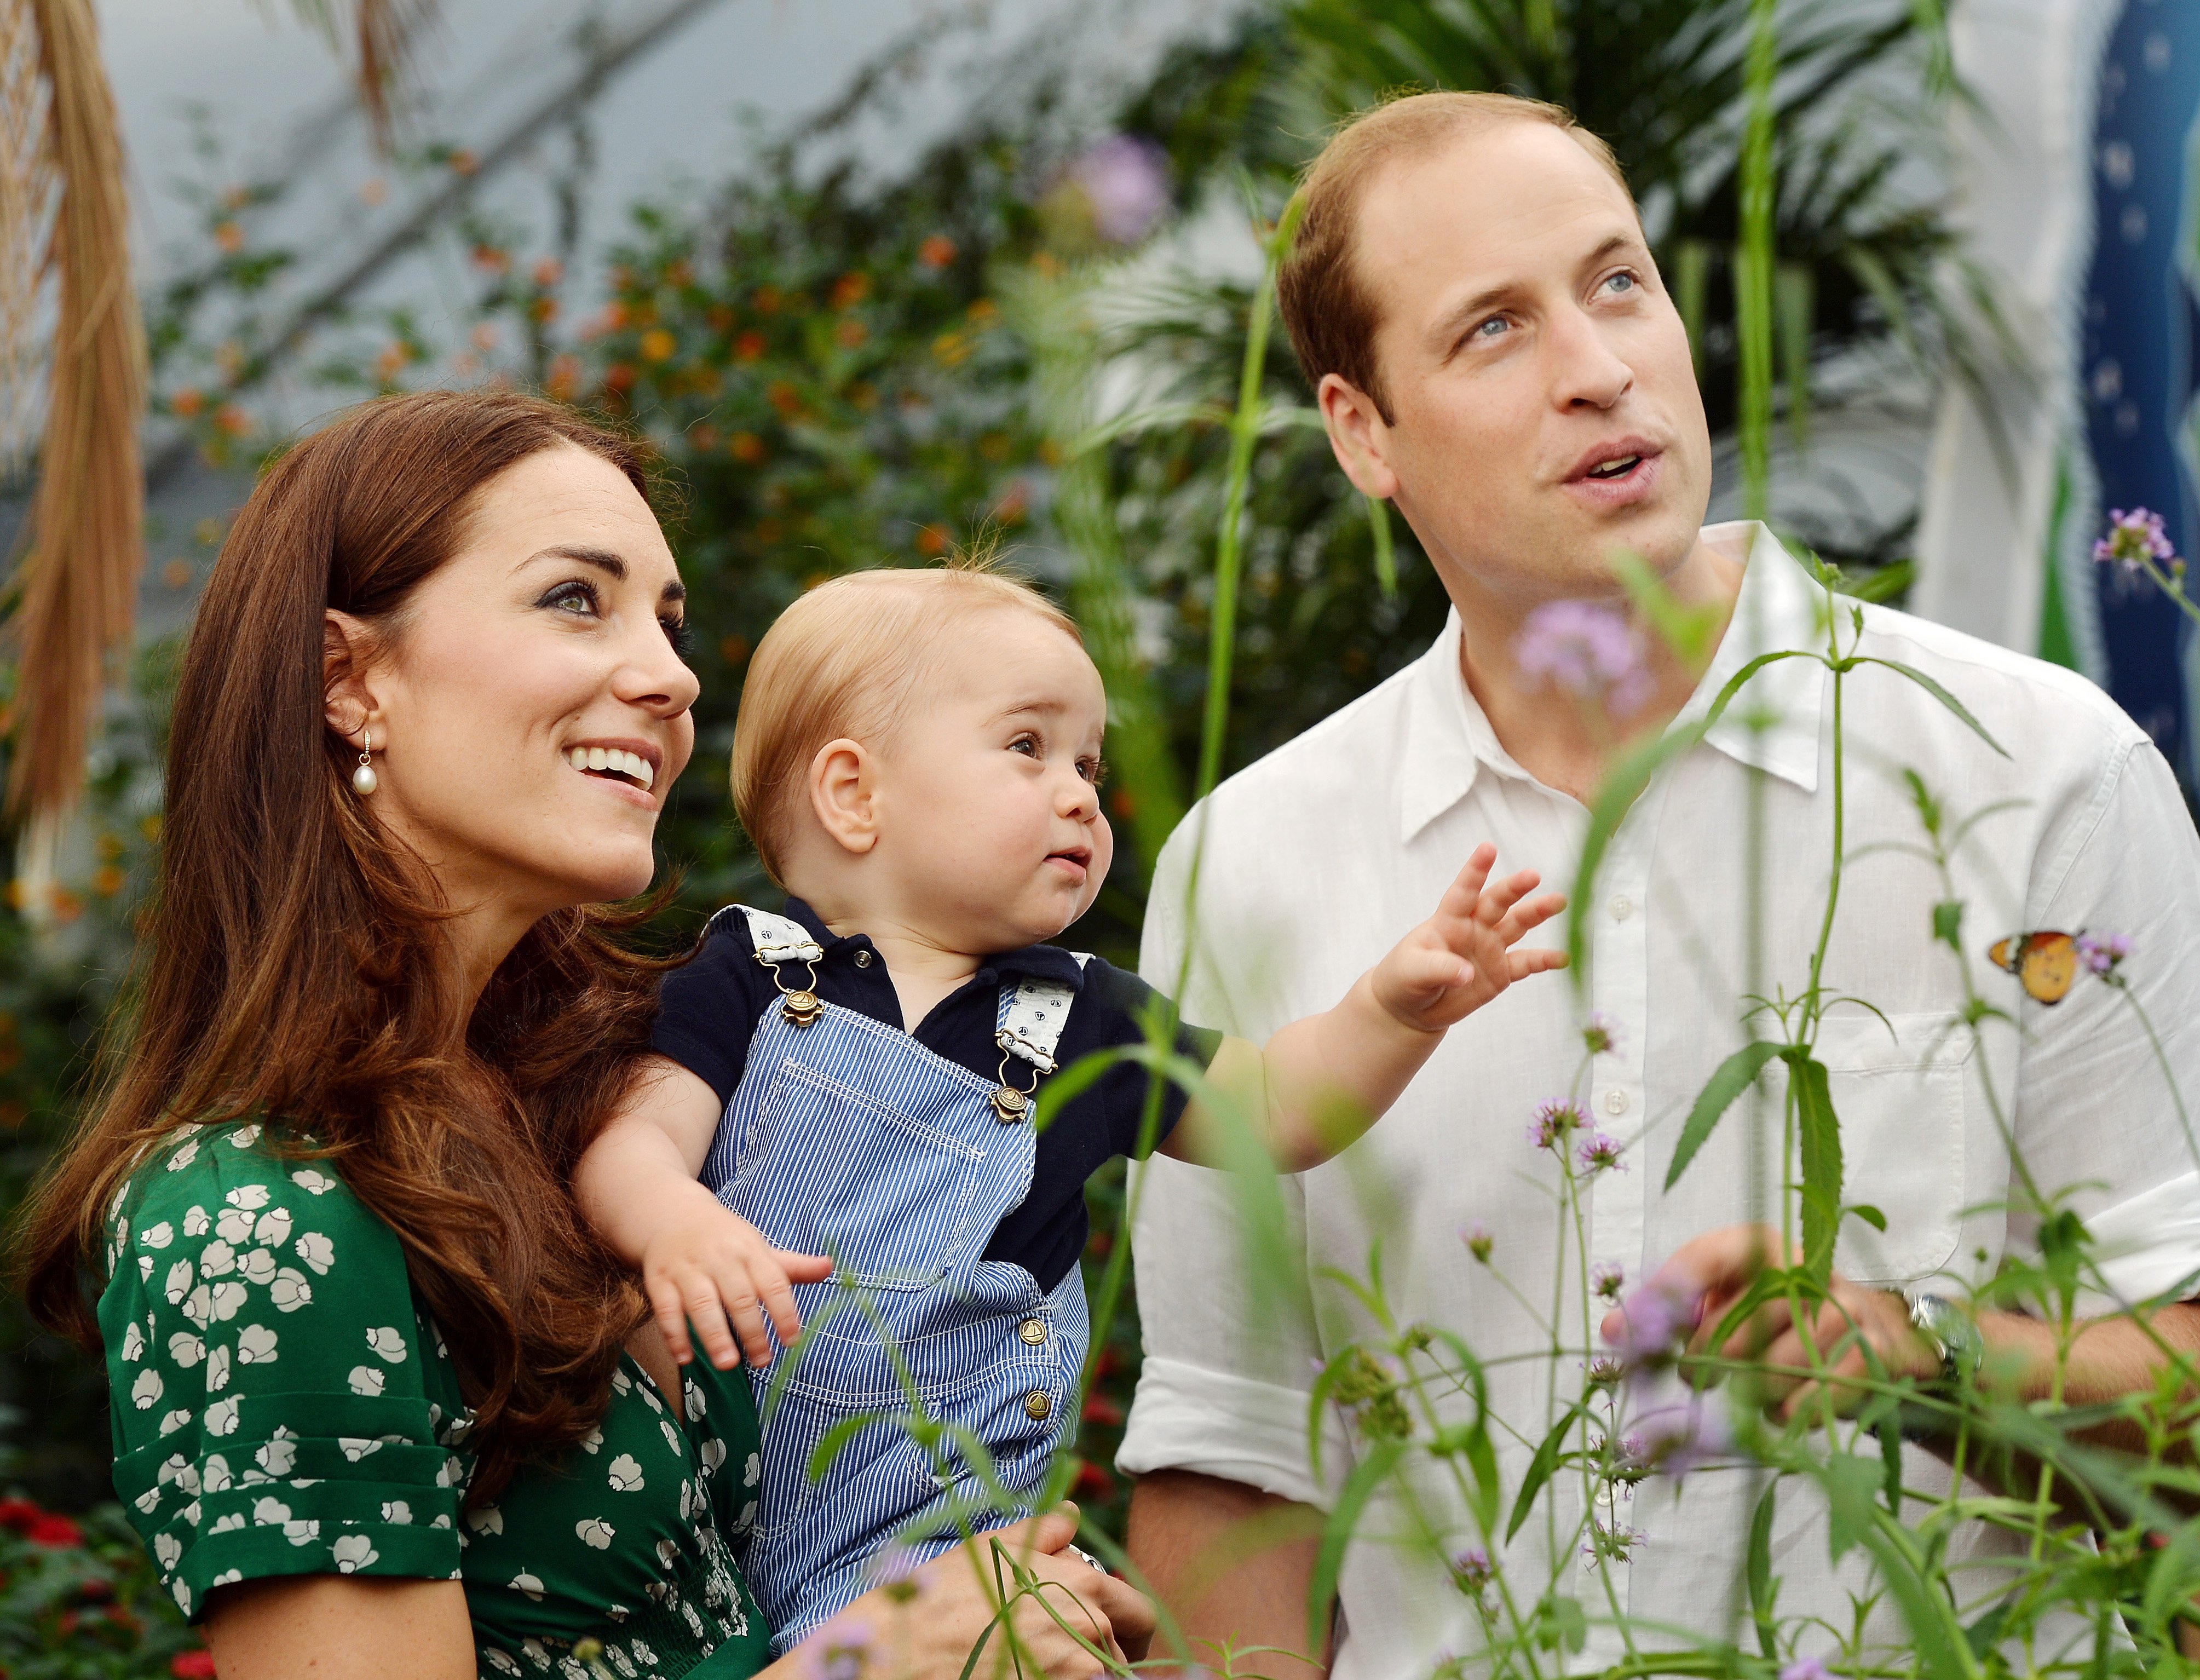 Kate Middleton, Prince George, and Prince William at the Natural History Museum on July 2, 2014 in London, England. | Source: Getty Images